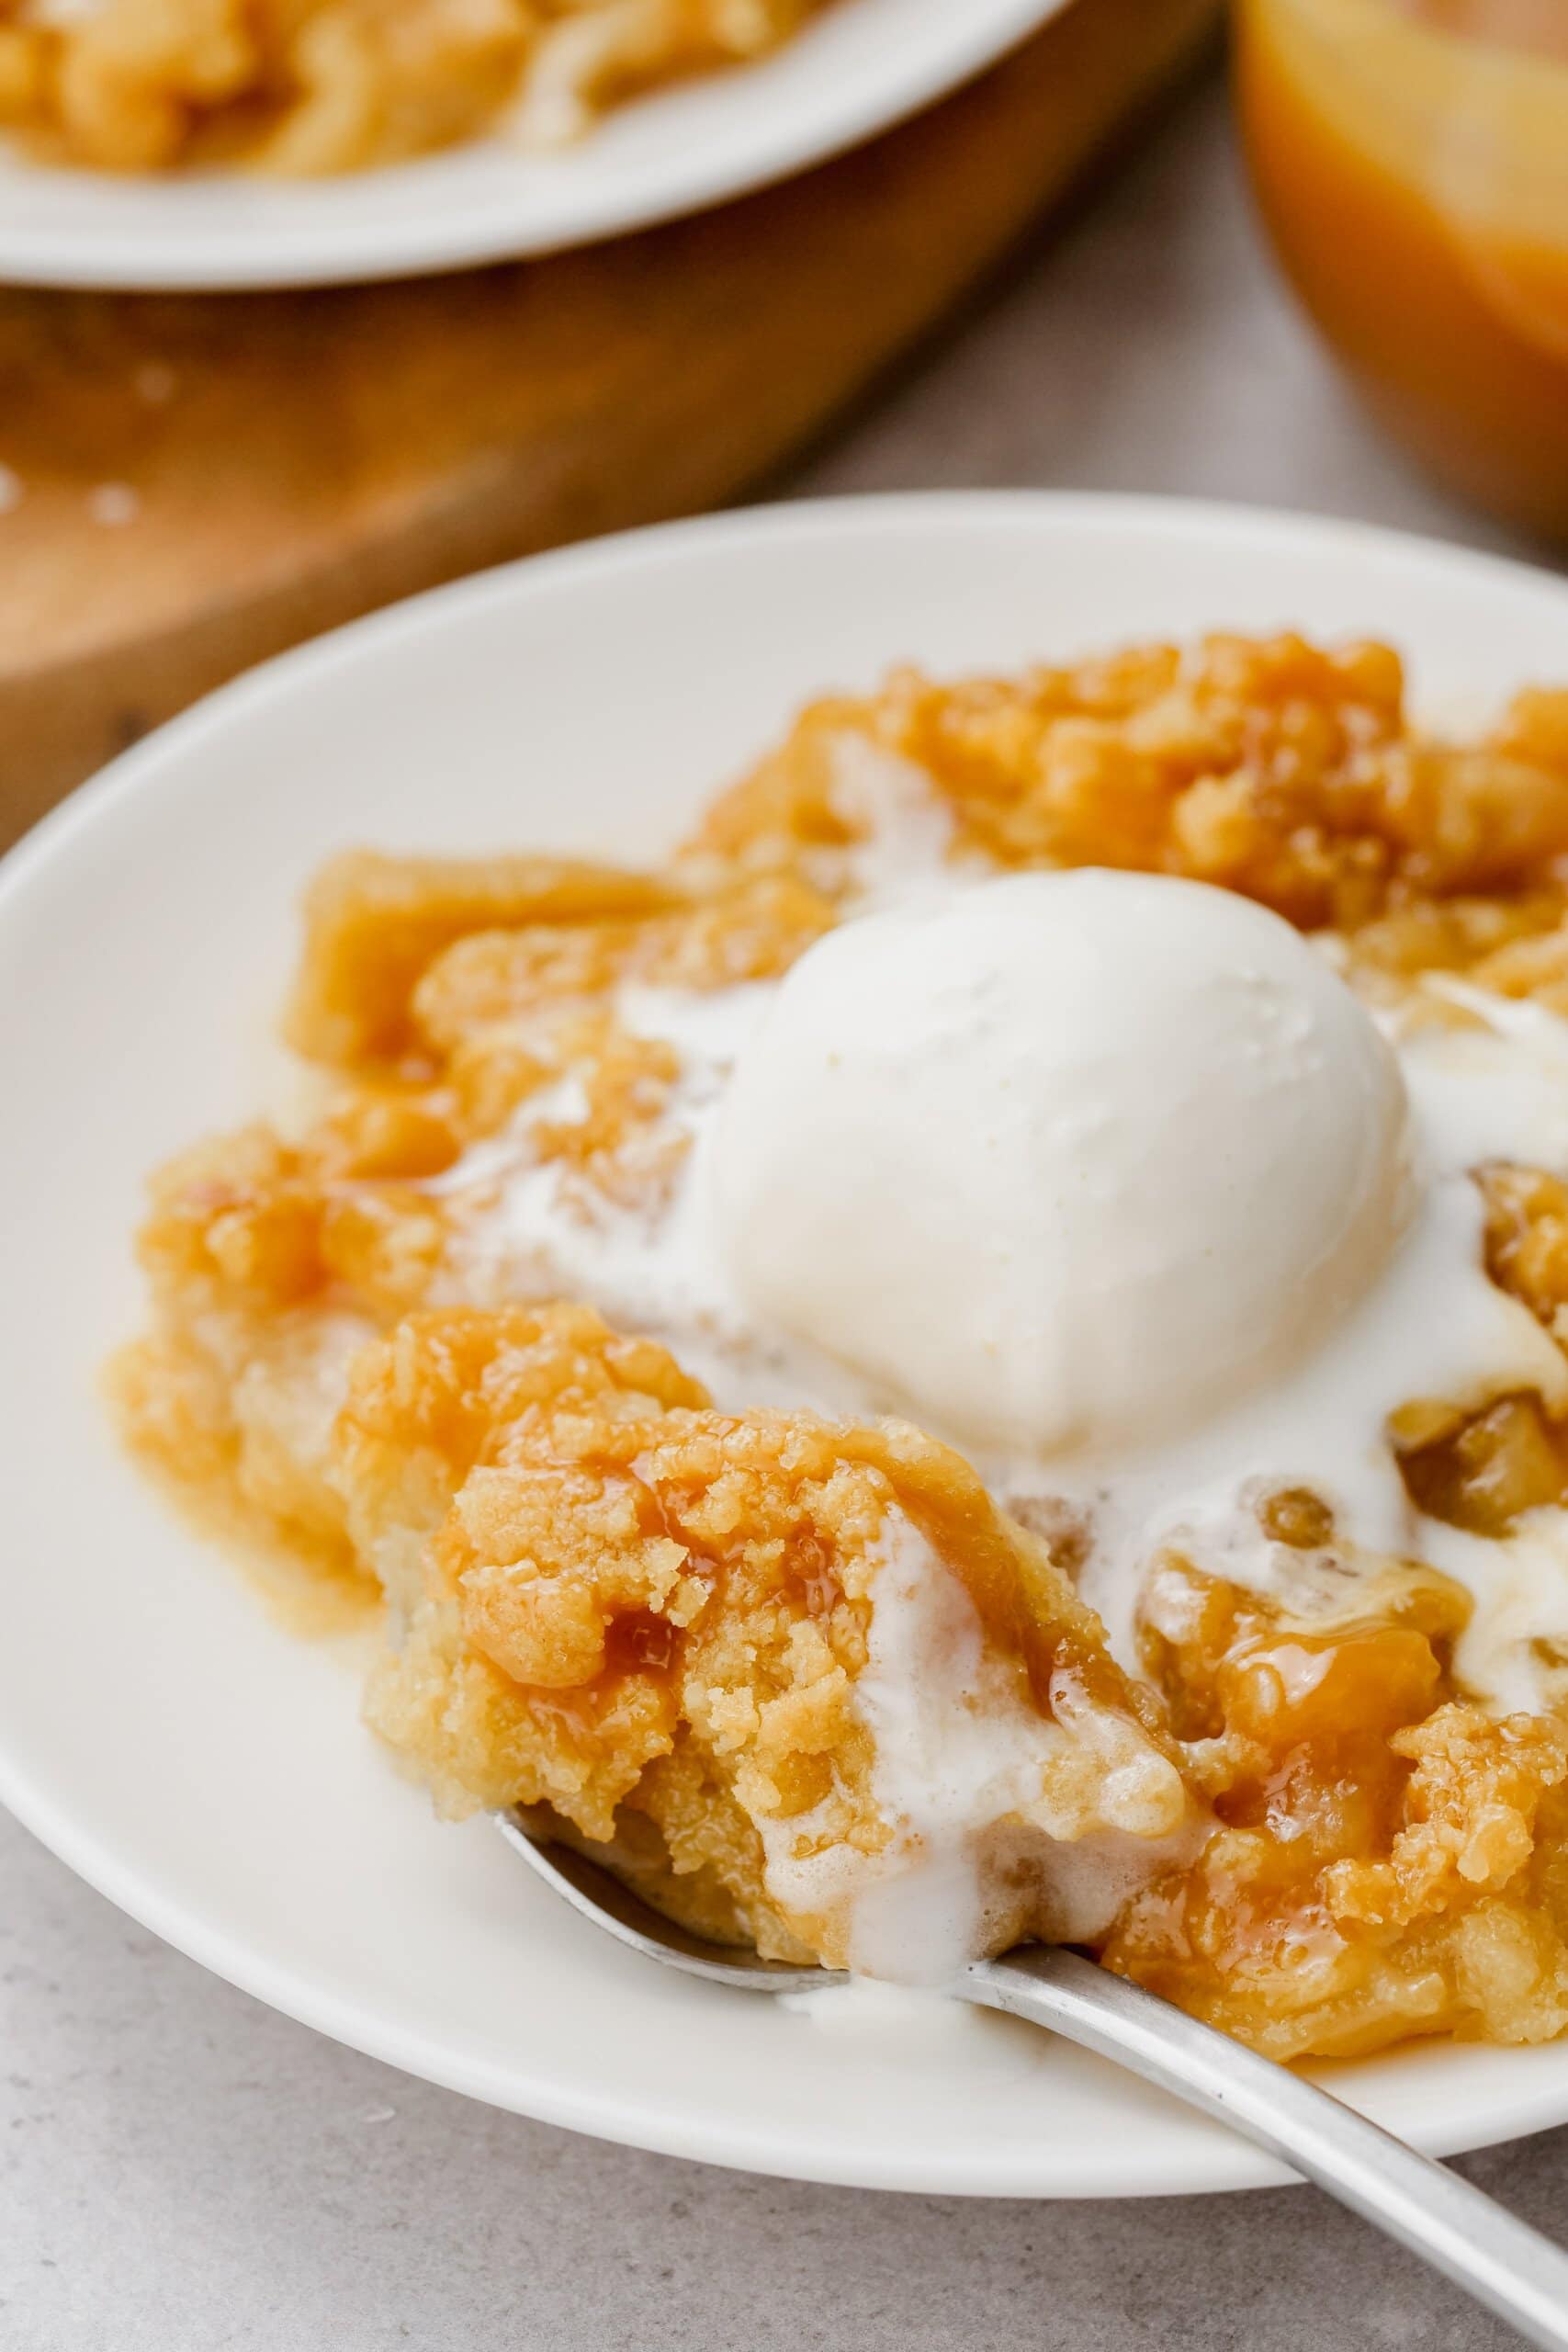 salted caramel apple crumble with a scoop of vanilla ice cream